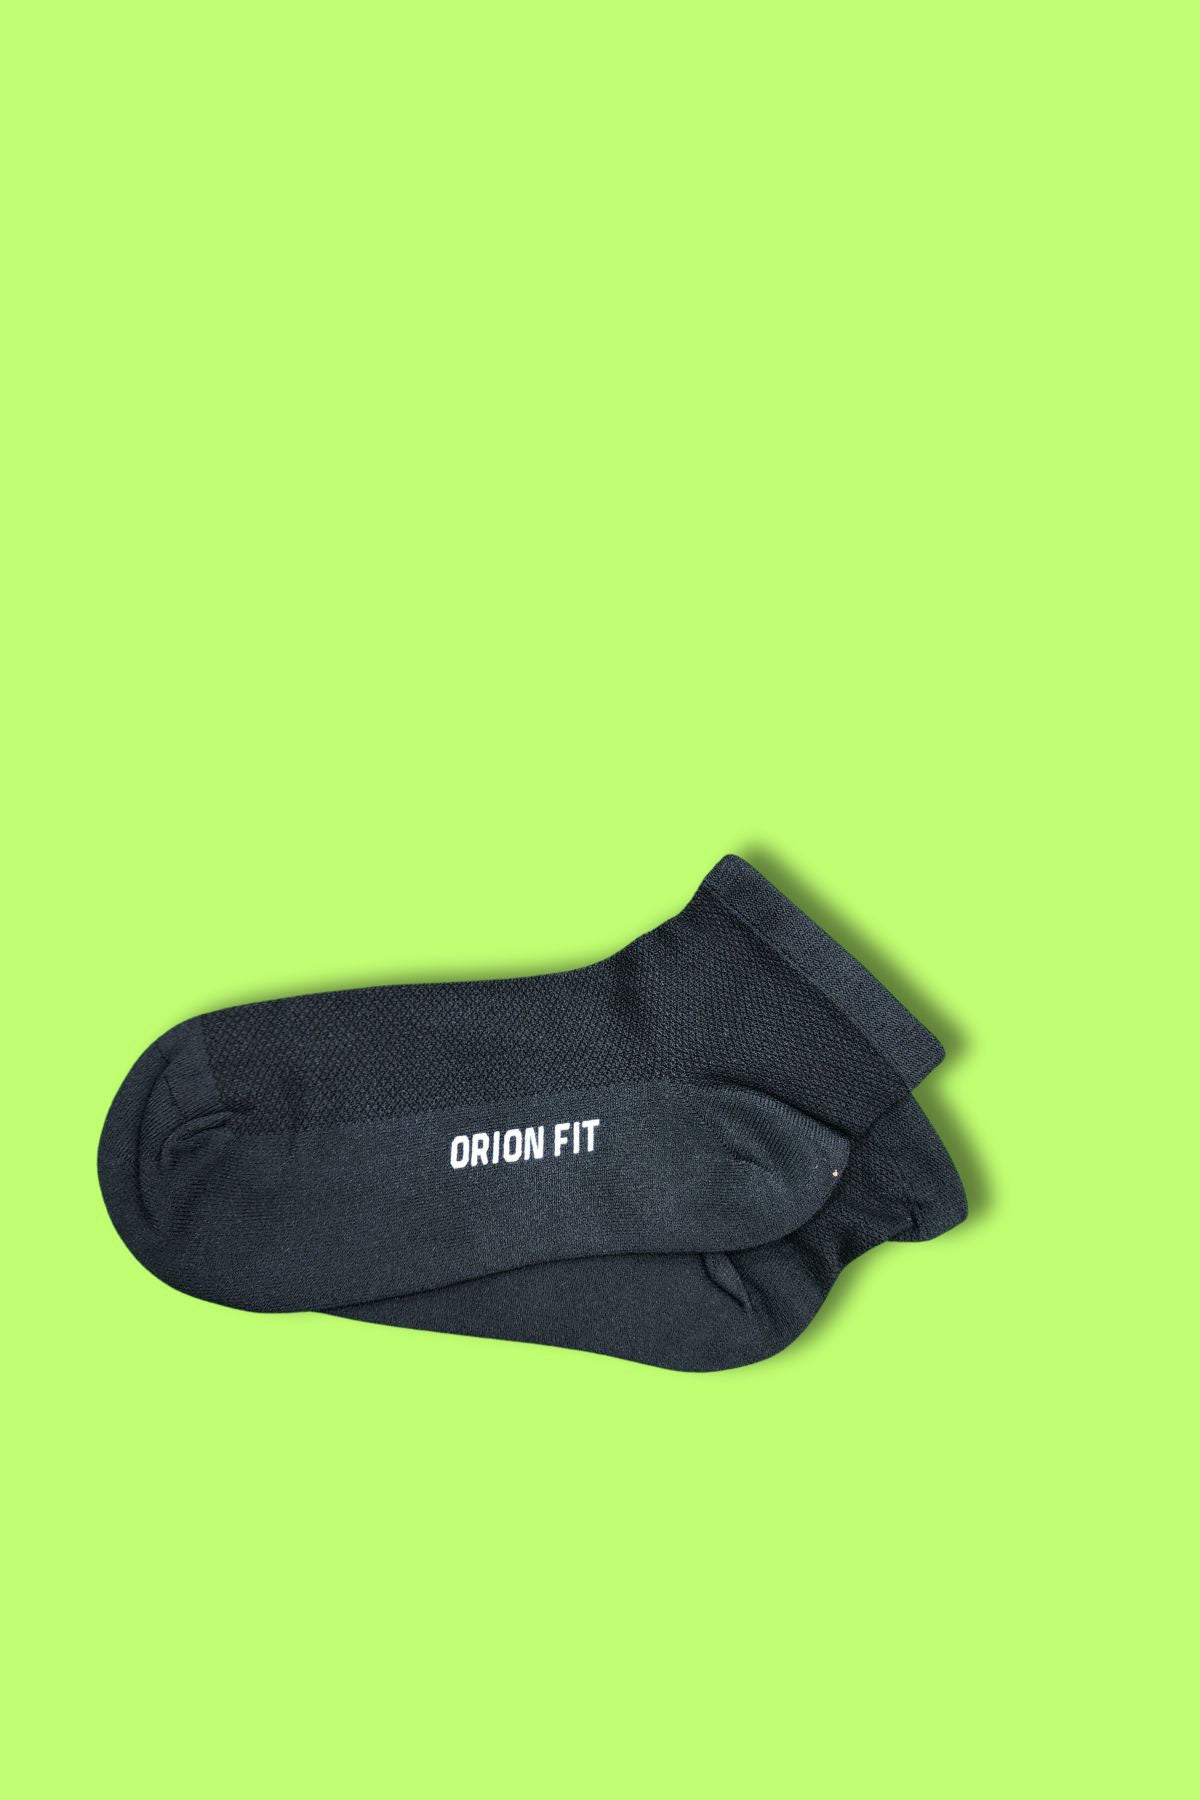 AMPLIFY ACTIVE FIT SOCKS-BLACK - The Orion Fit